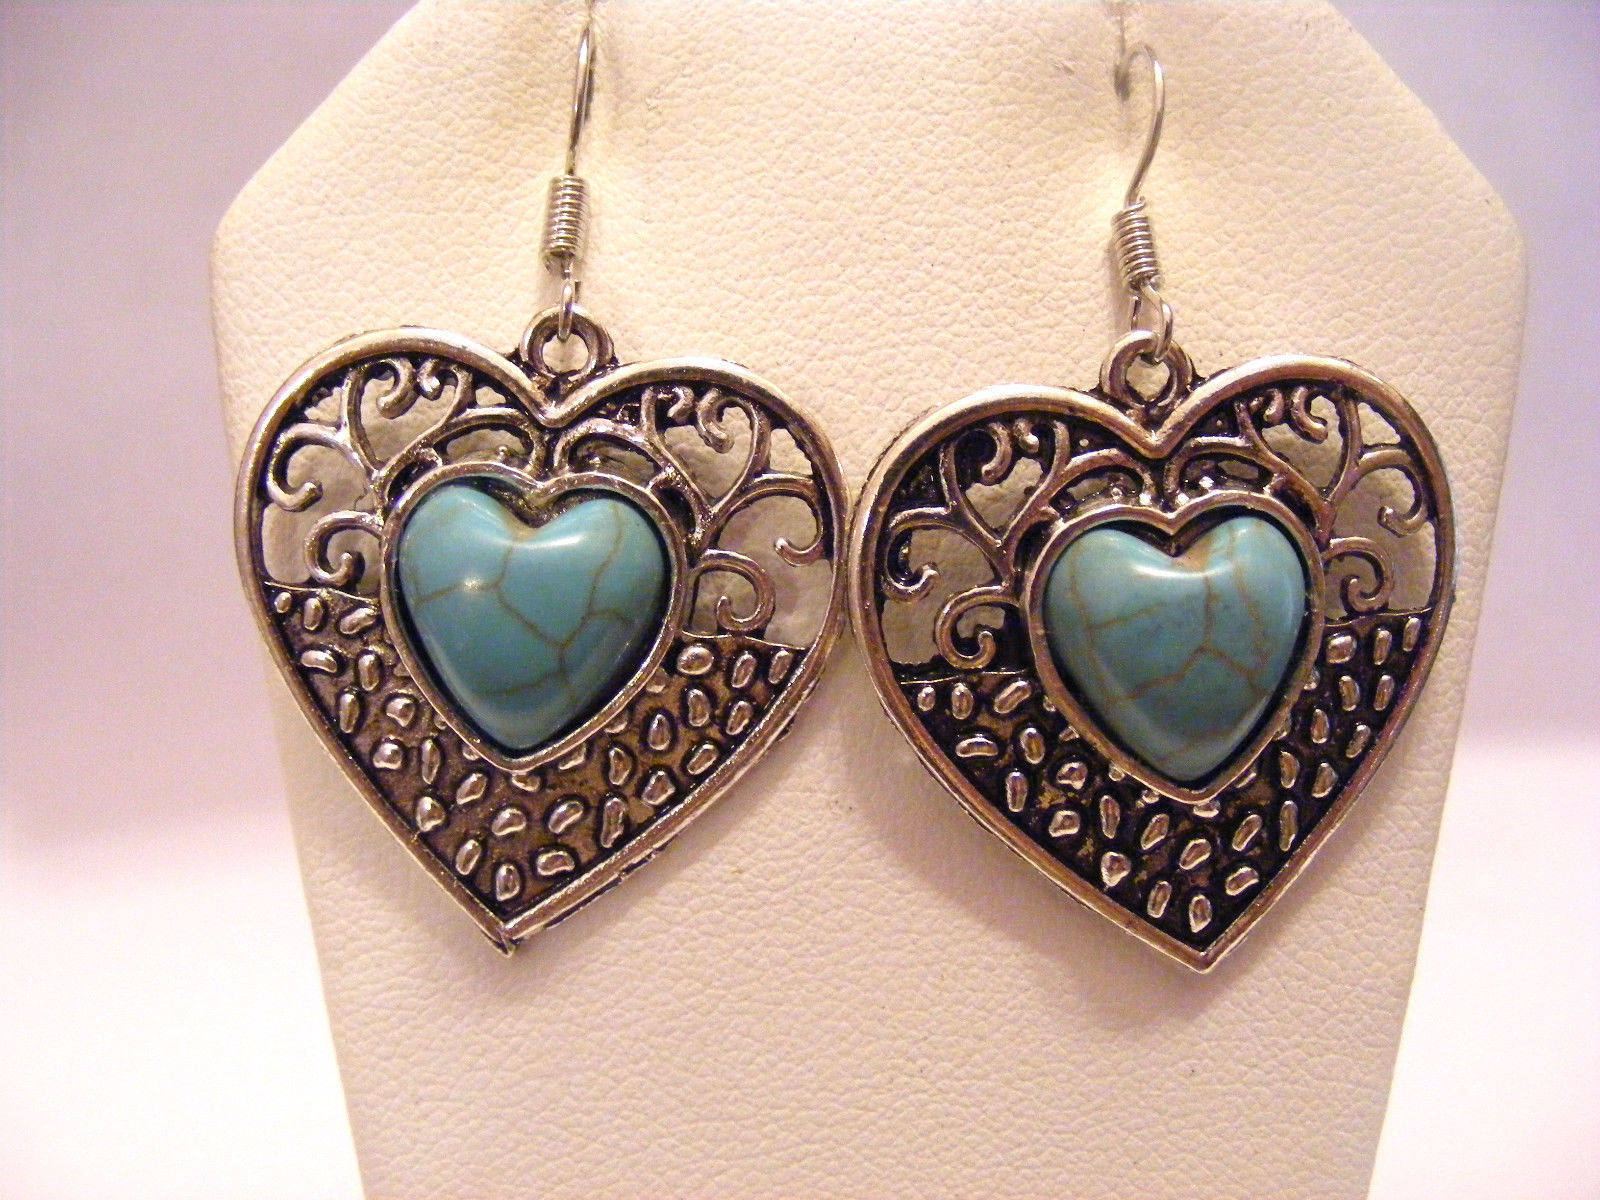 HEART SHAPED TURQUOISE CABOCHONS  AND  TIBETAN SILVER DANGLE PIERCED EARRINGS - $9.49